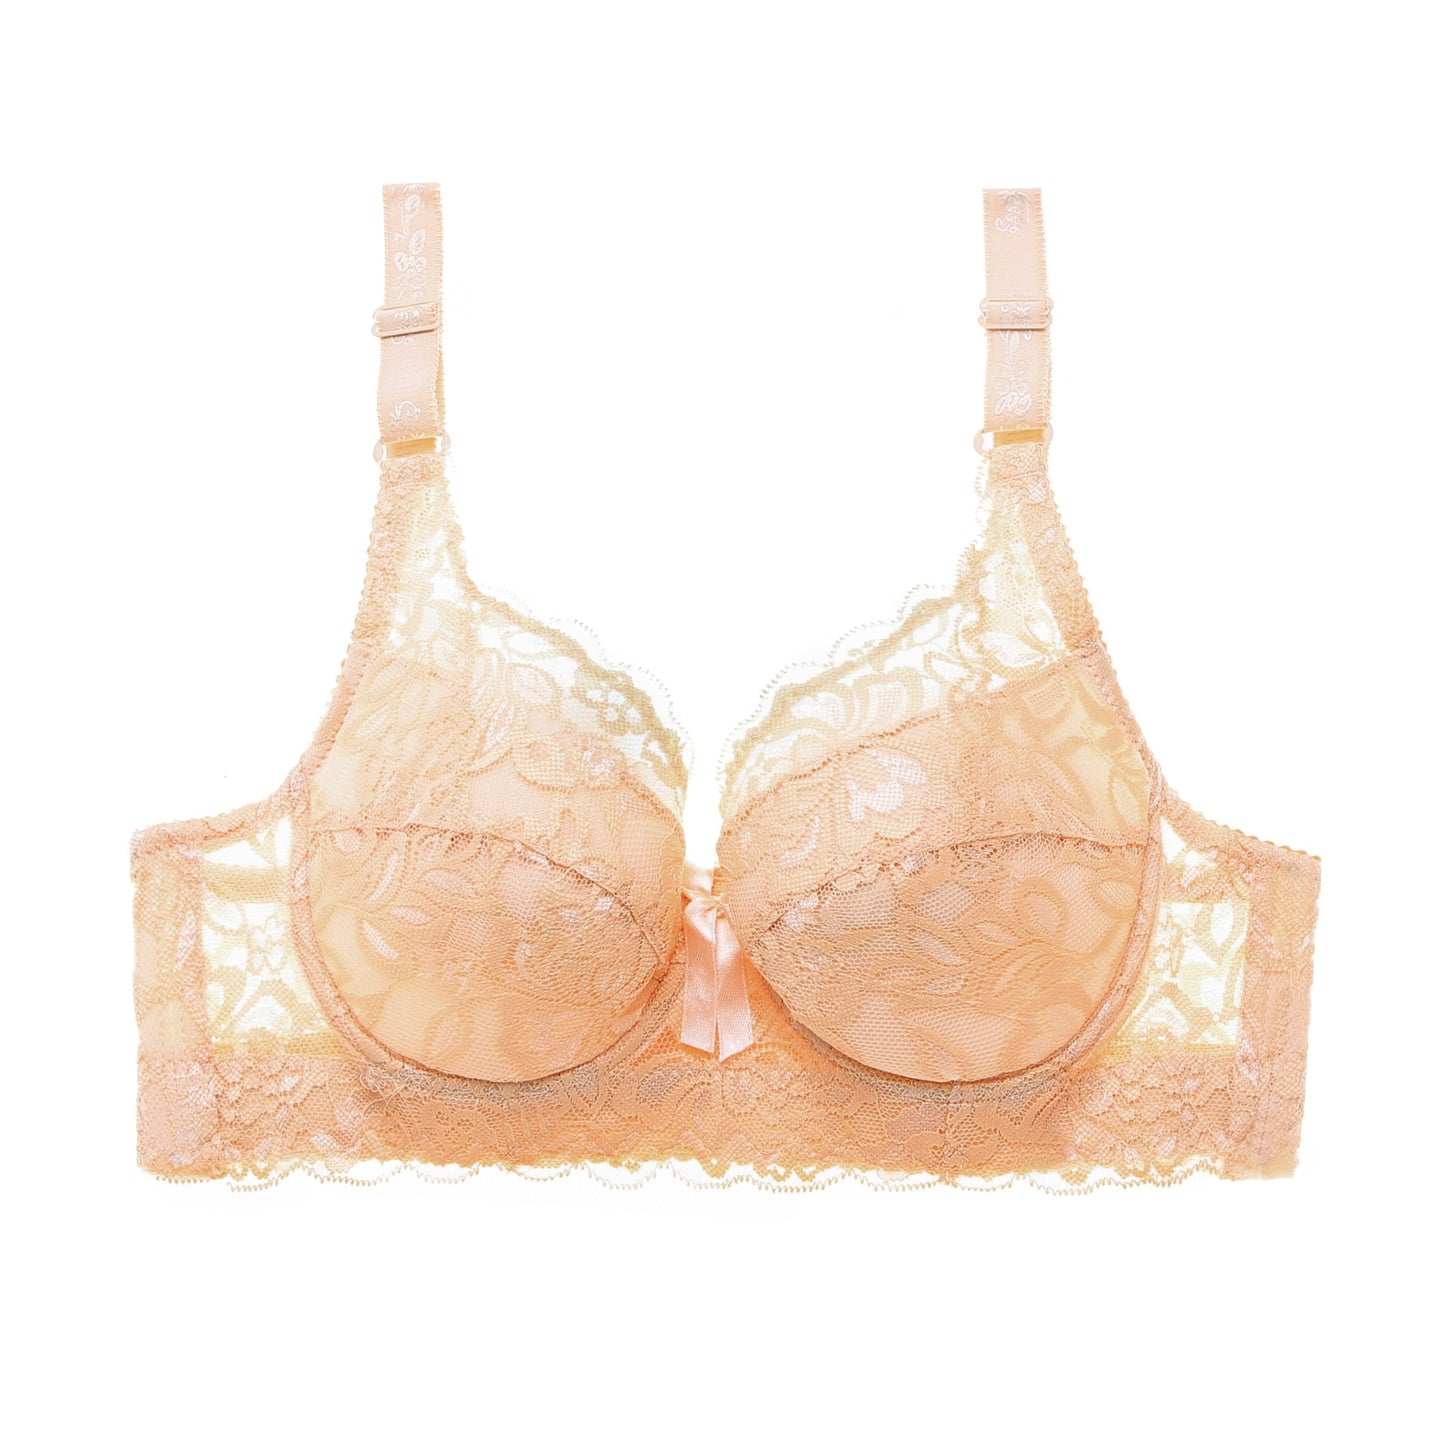 Lace Push Up Bras for Women